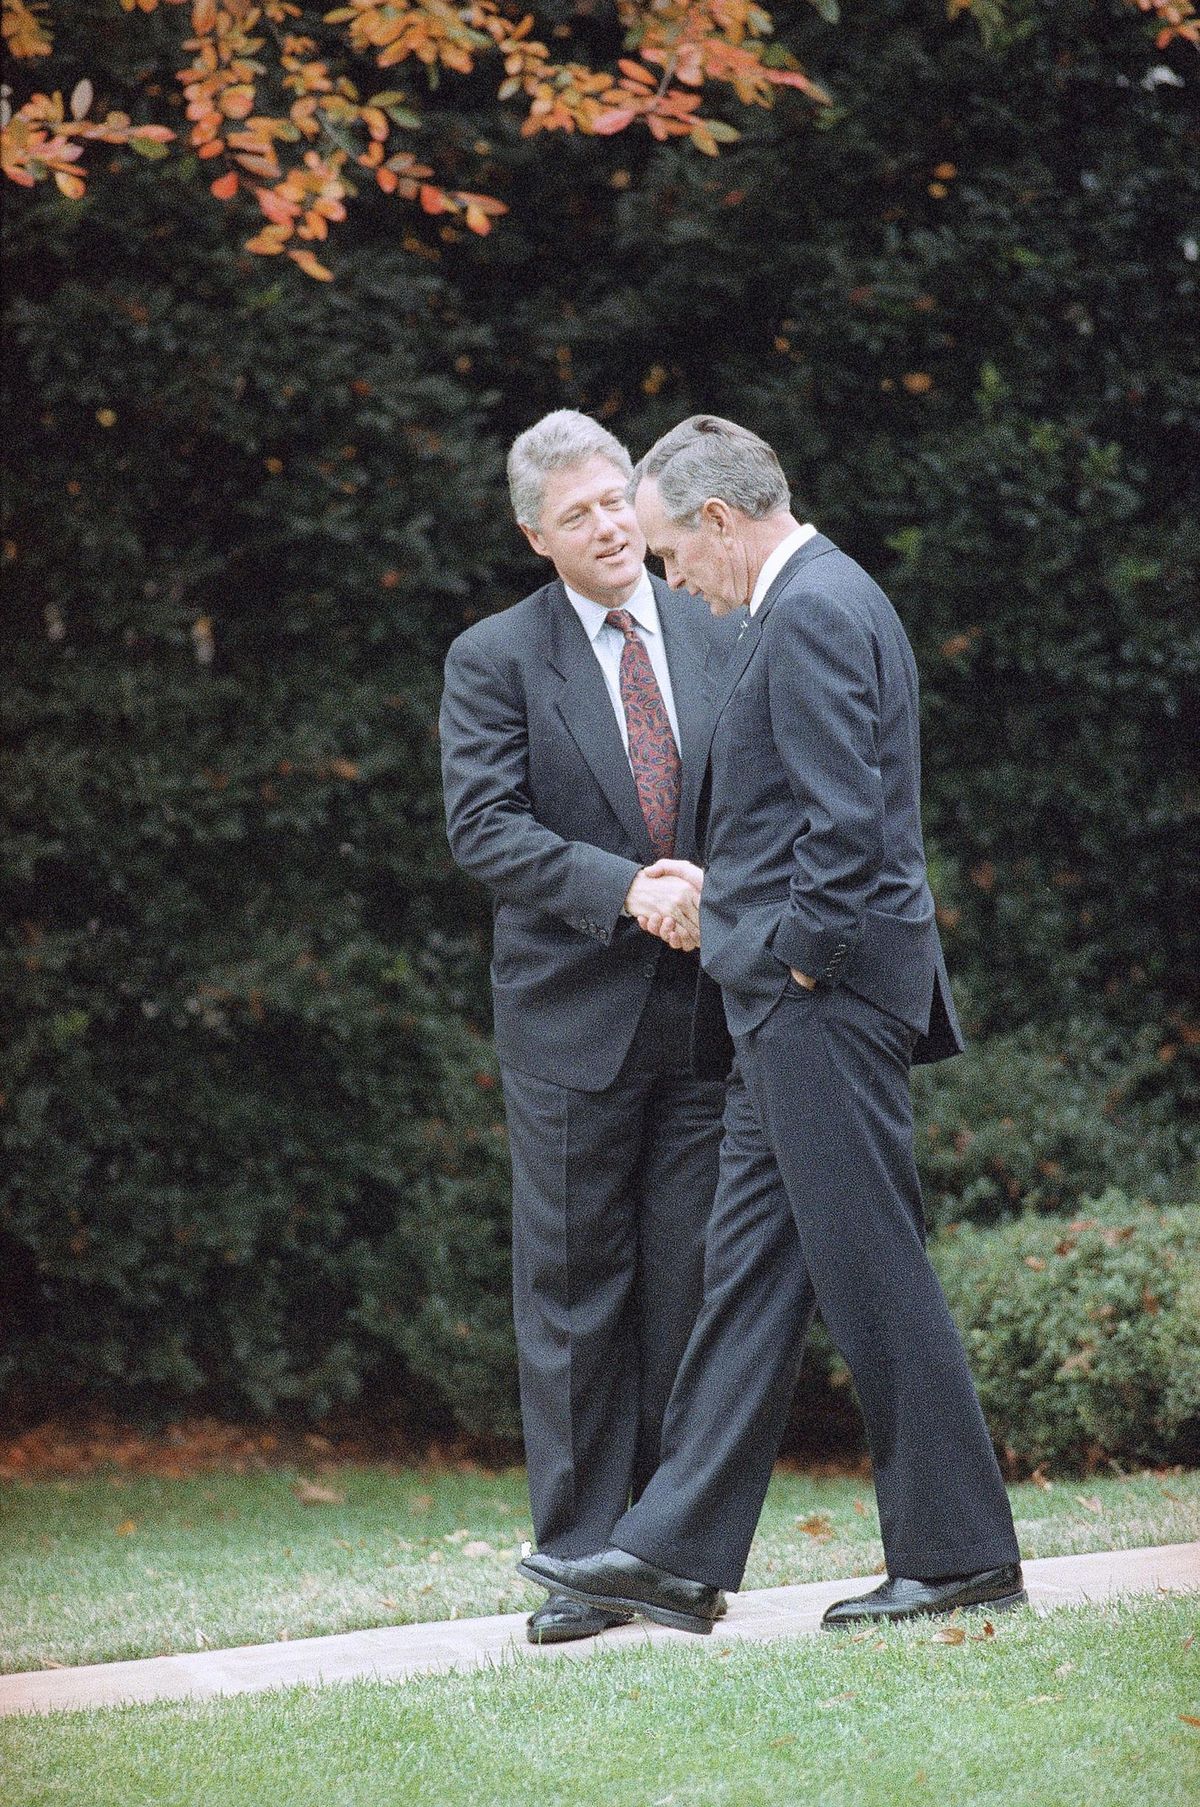 President George H.W. Bush shakes hands with President-elect Bill Clinton after an Oval Office meeting Nov. 18, 1992, in Washington. (Greg Gibson / Associated Press)